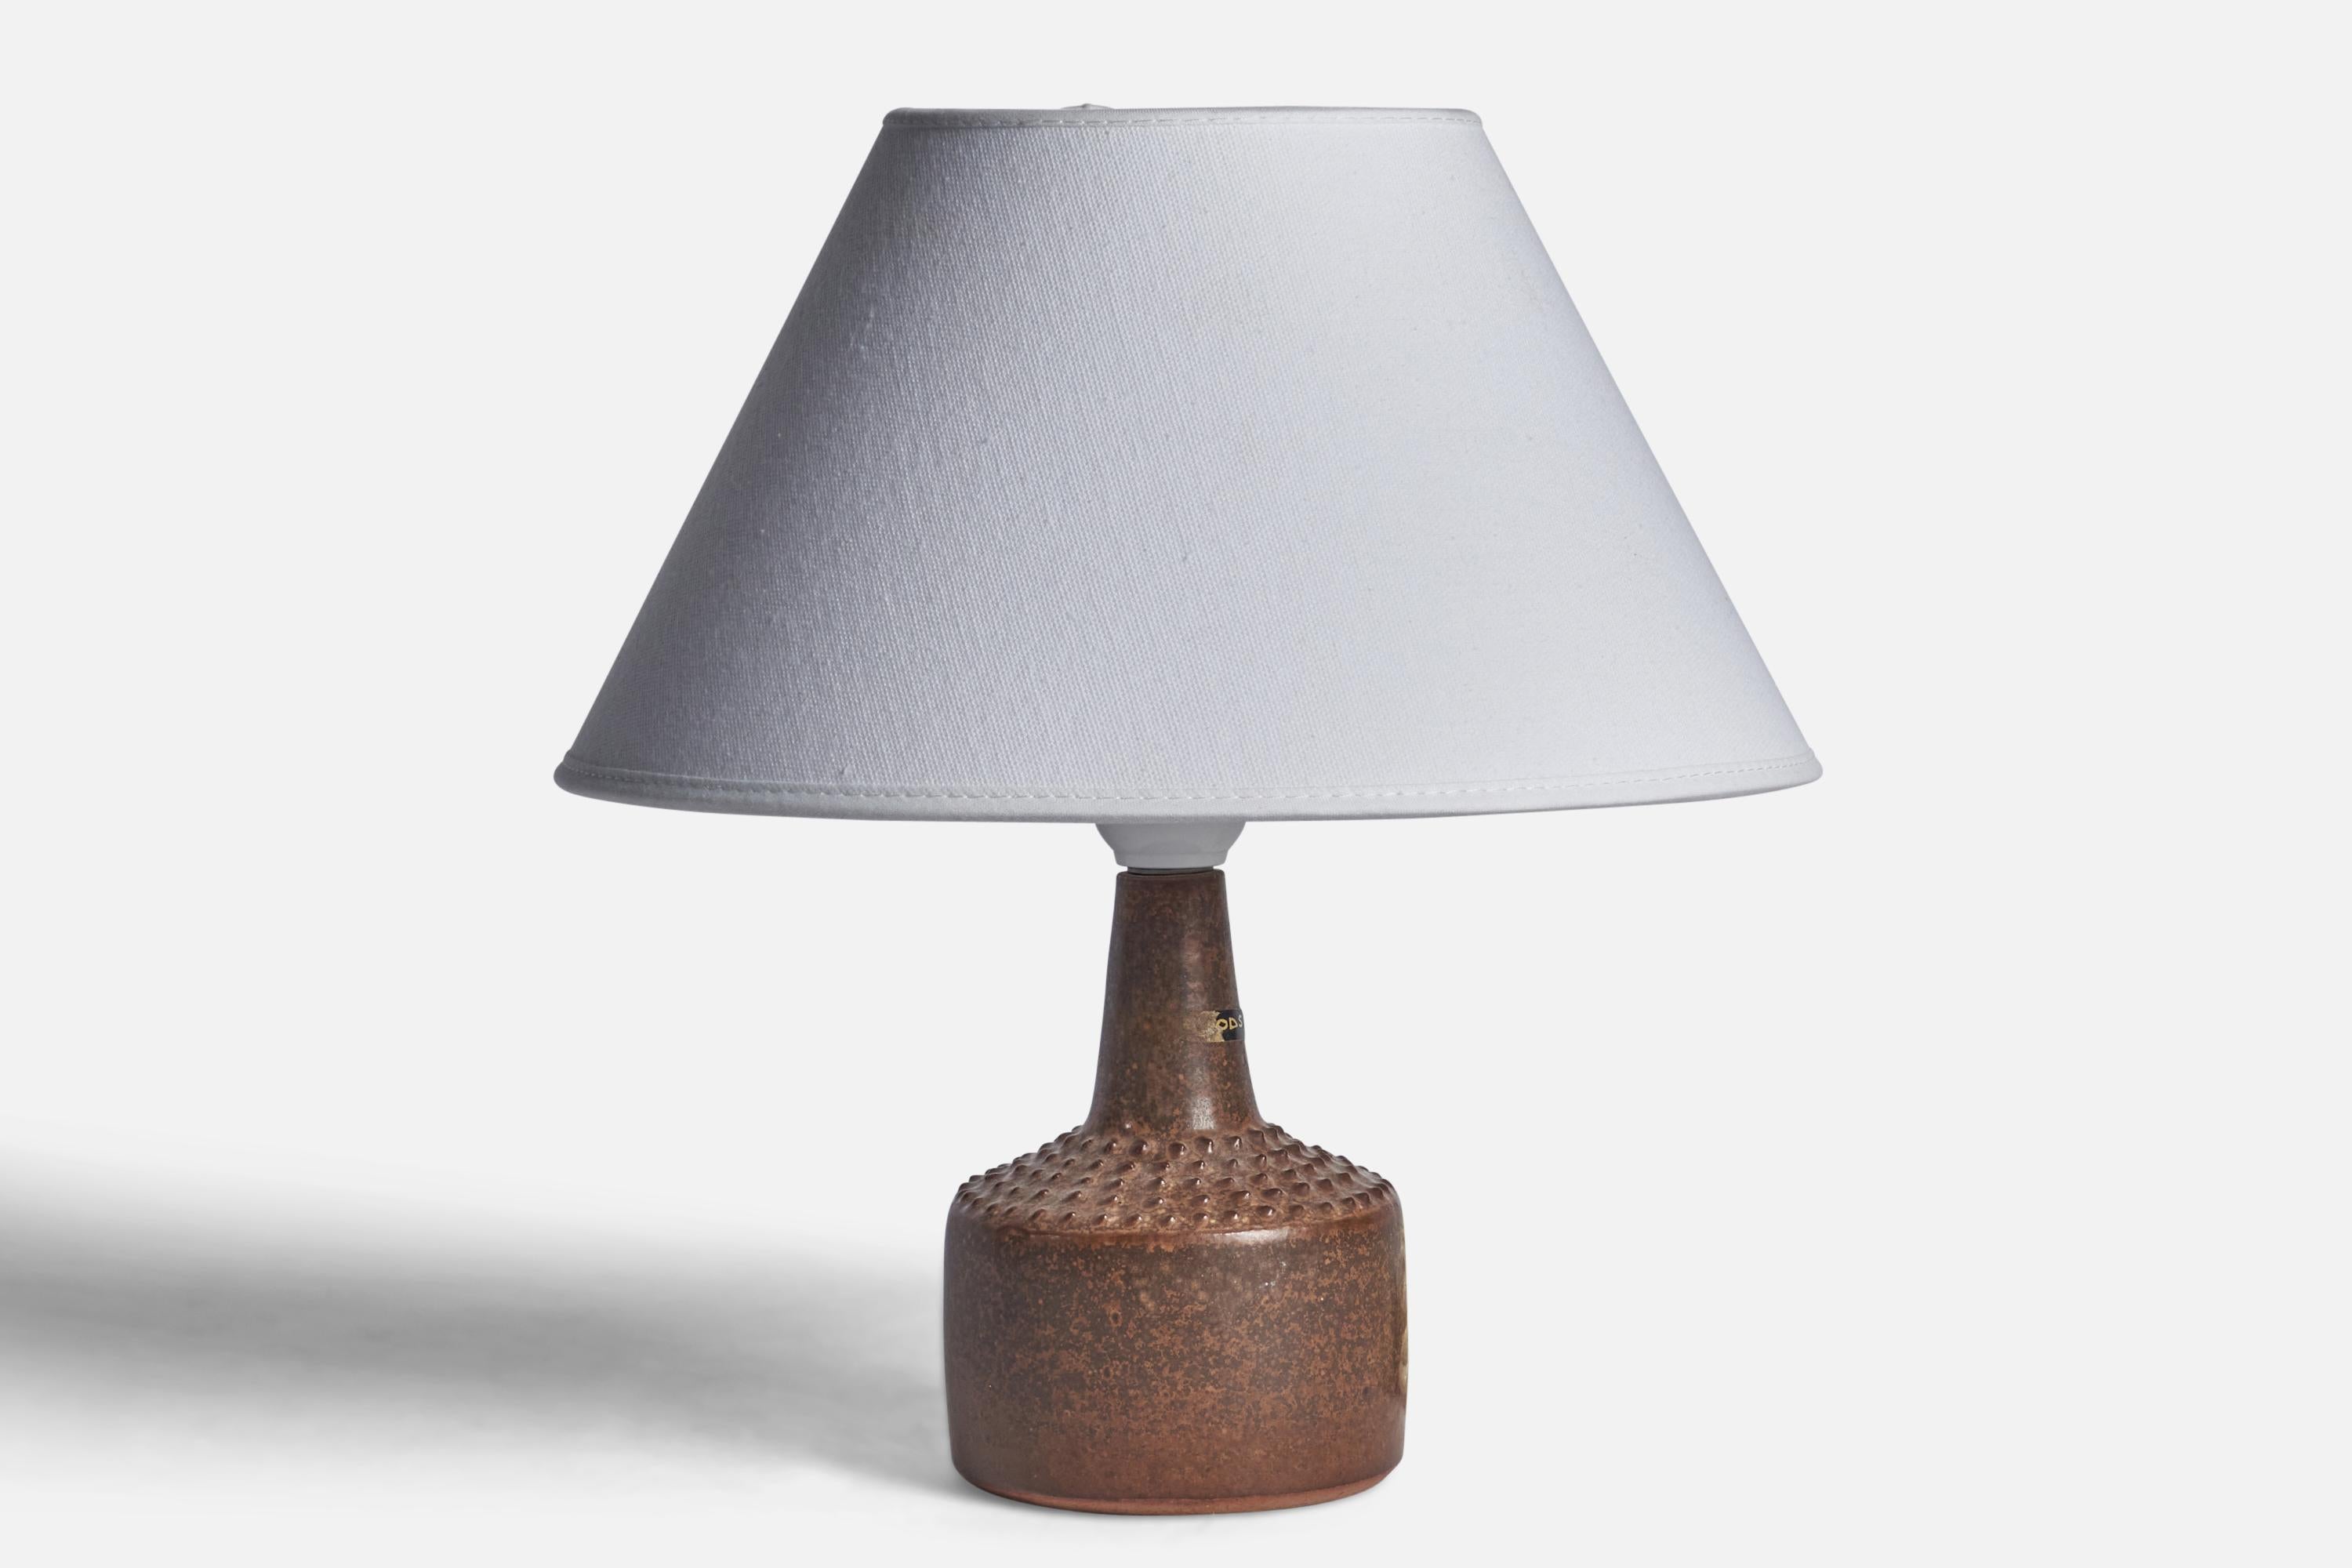 A small brown-glazed stoneware table lamp designed and produced by Rolf Palm, Mölle, Sweden, c. 1960s.

Dimensions of Lamp (inches): 8.70” H x 3.75” Diameter
Dimensions of Shade (inches): 7” Top Diameter x 10” Bottom Diameter x 5.5” H 
Dimensions of